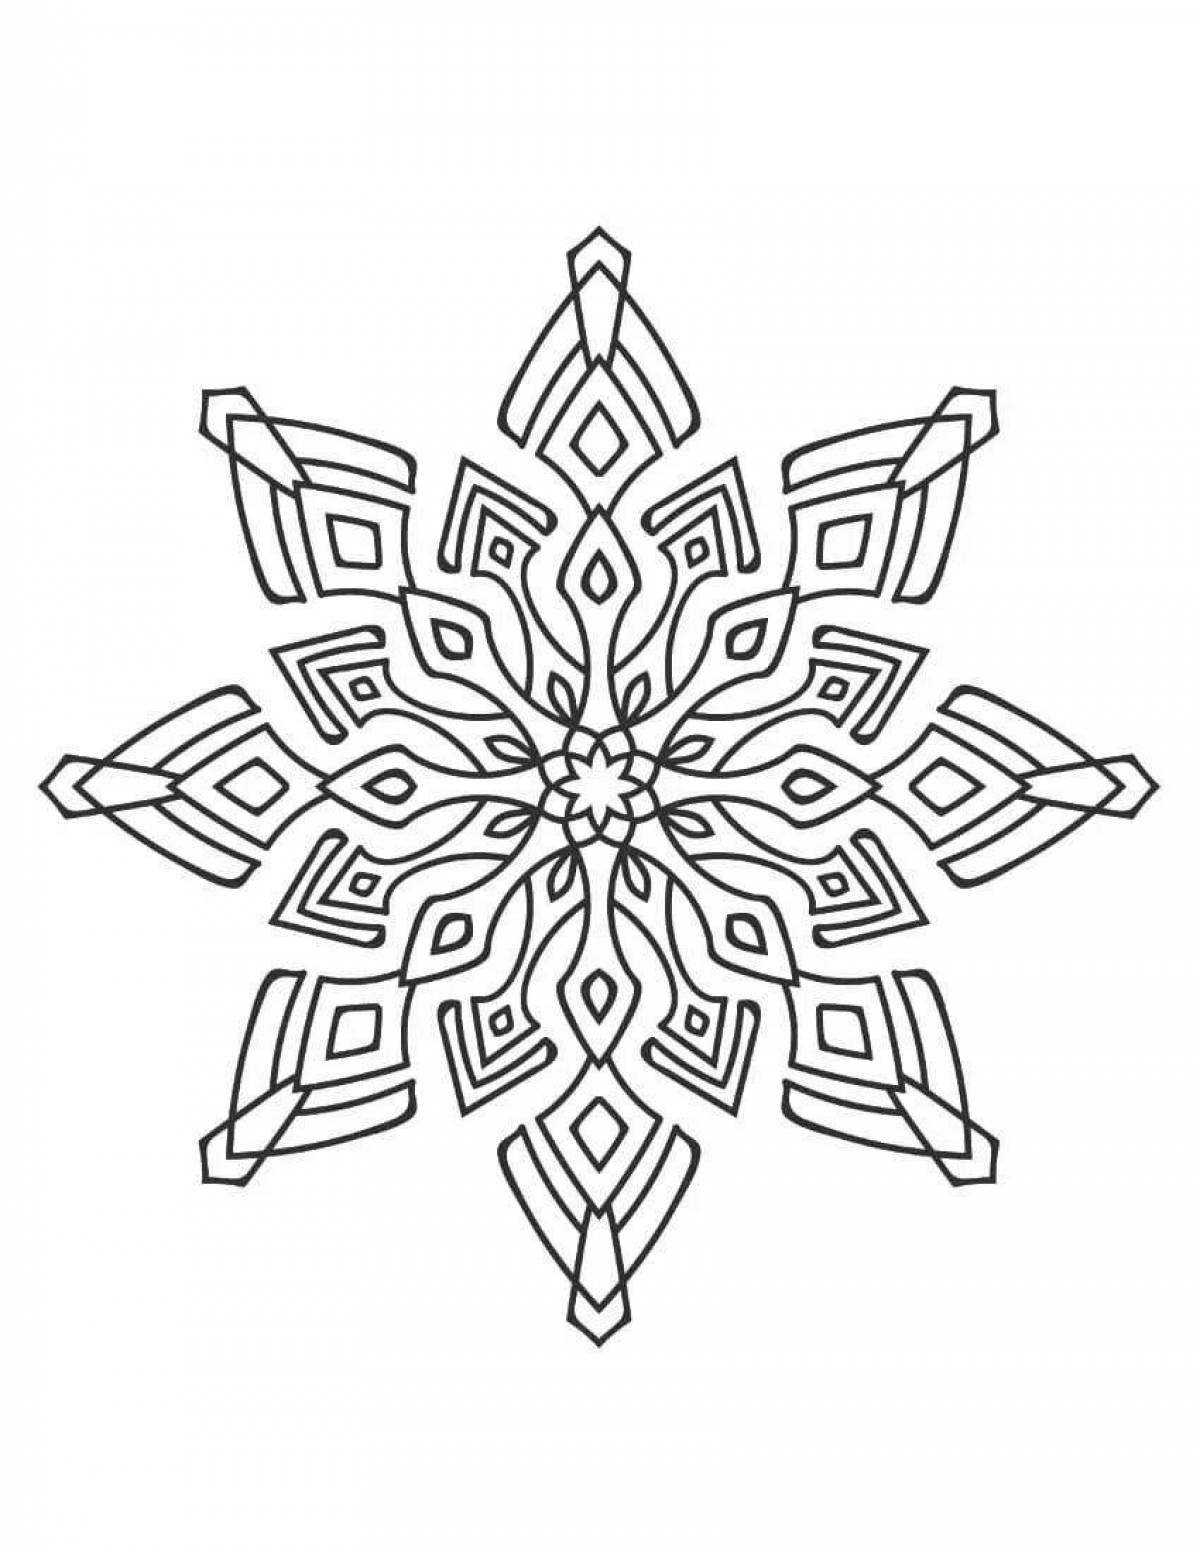 Exciting Christmas snowflake coloring book